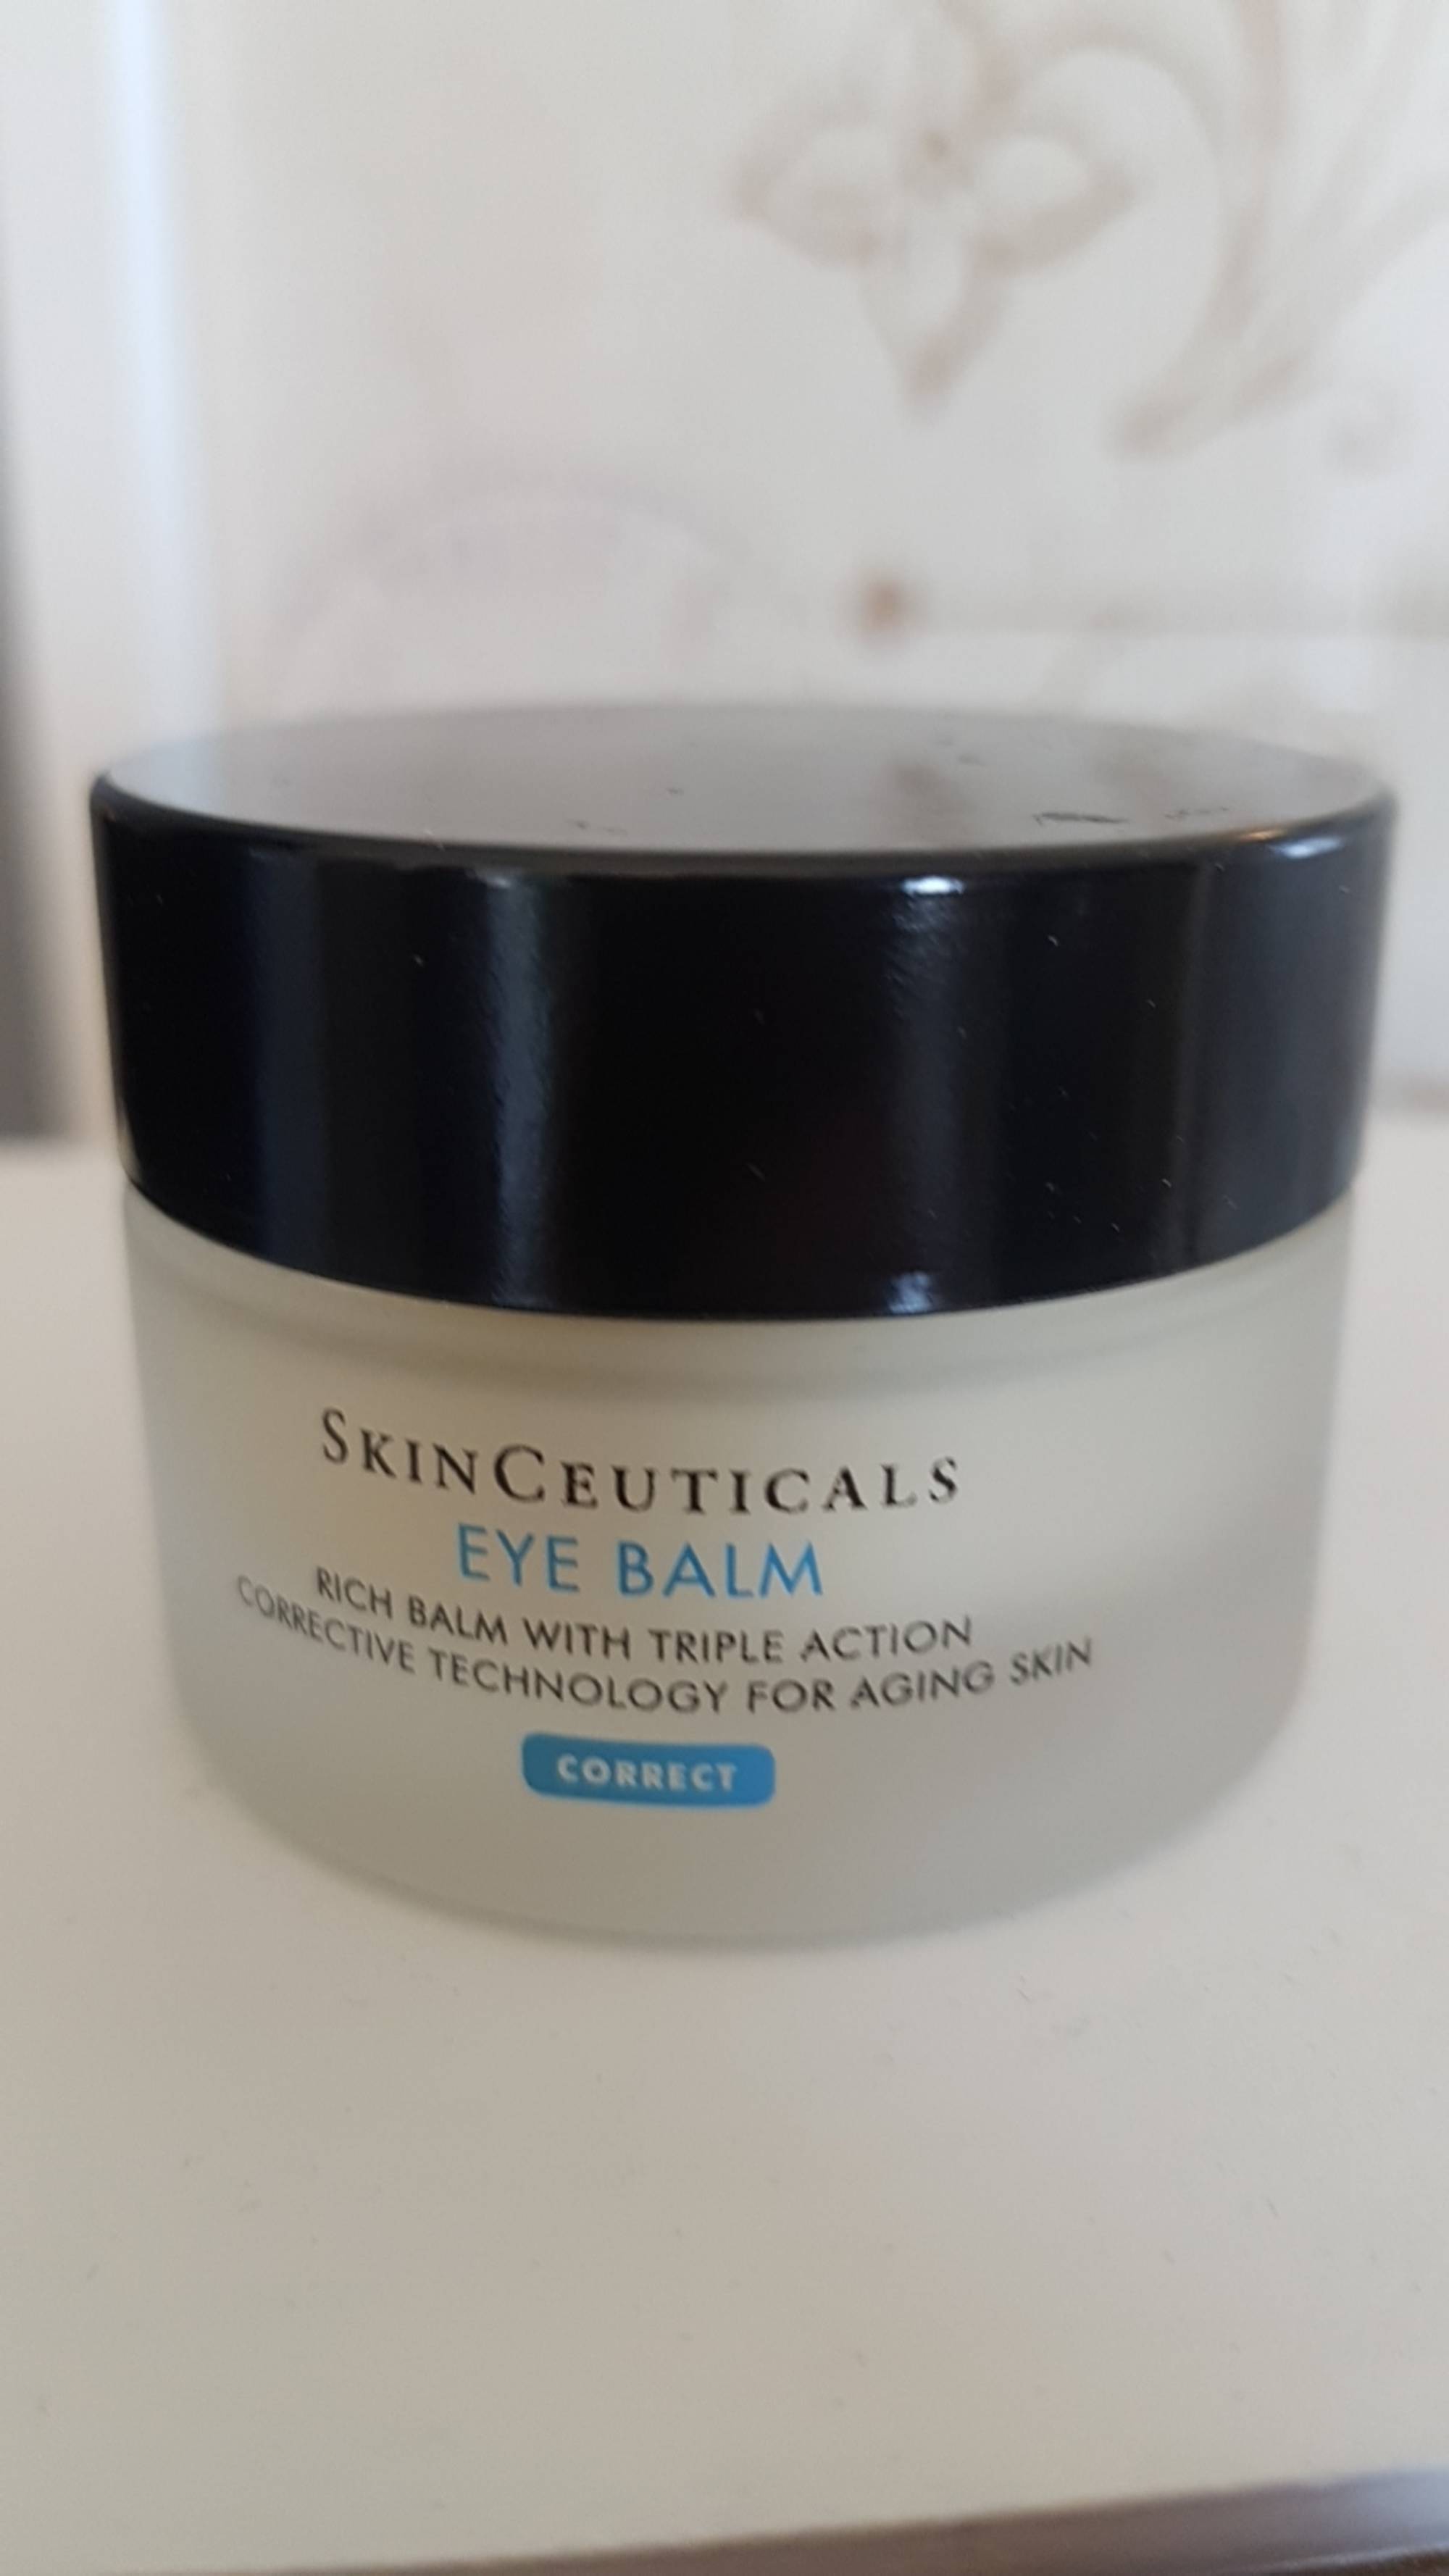 SKINCEUTICALS - Eye balm - Rich balm with triple action